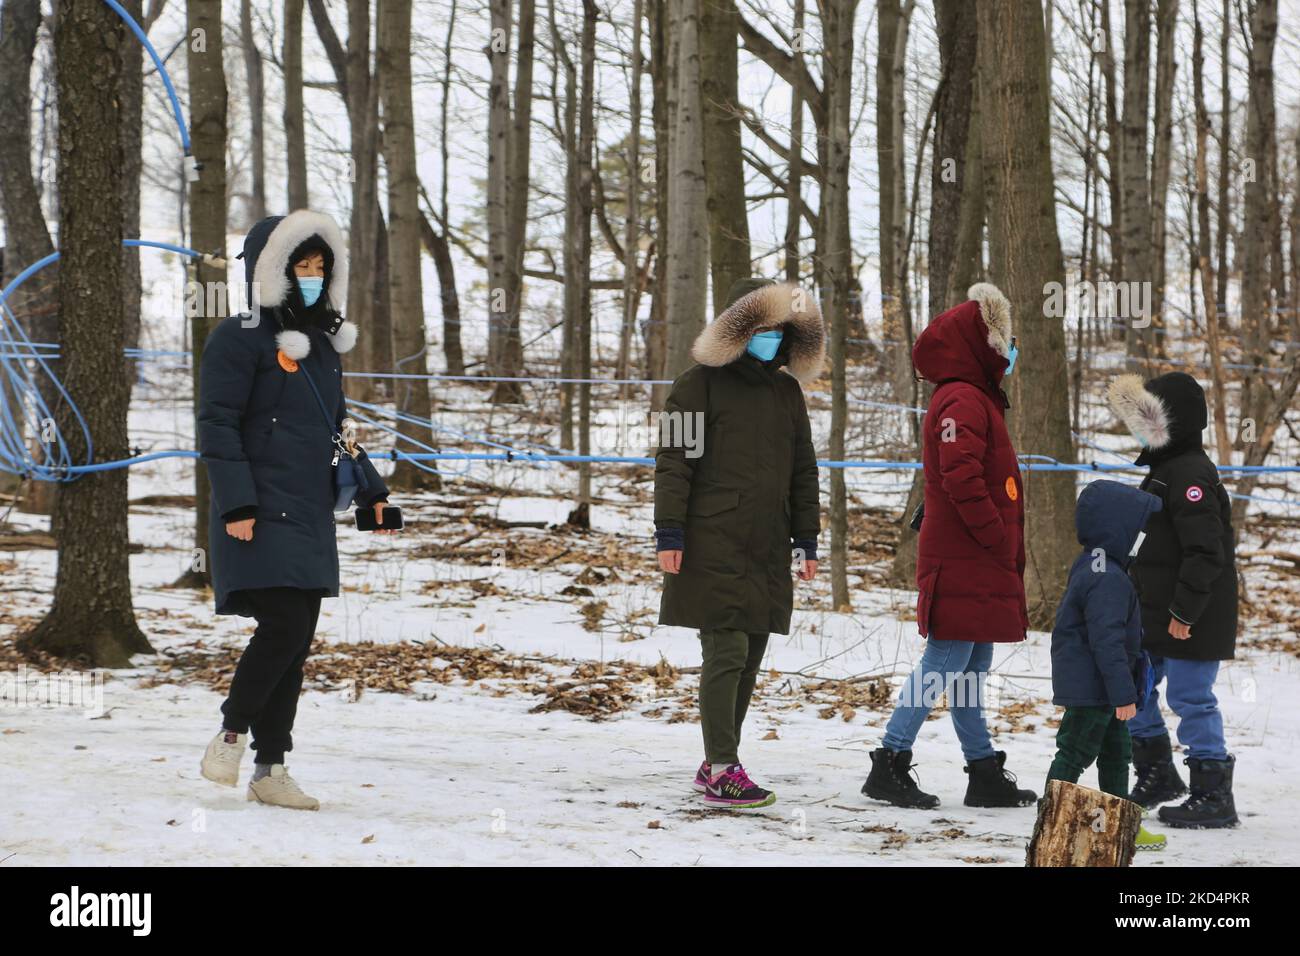 People walk through the sugarbush as they vist a maple syrup farm during the Maple Sugar Festival in Mount Albert, Ontario, Canada, on March 05, 2022. The Maple Sugar Festival celebrates maple syrup production and products made with maple syrup and takes part at many maple syrup producing farms across Ontario and Quebec. Maple syrup is only produced in North America. (Photo by Creative Touch Imaging Ltd./NurPhoto) Stock Photo